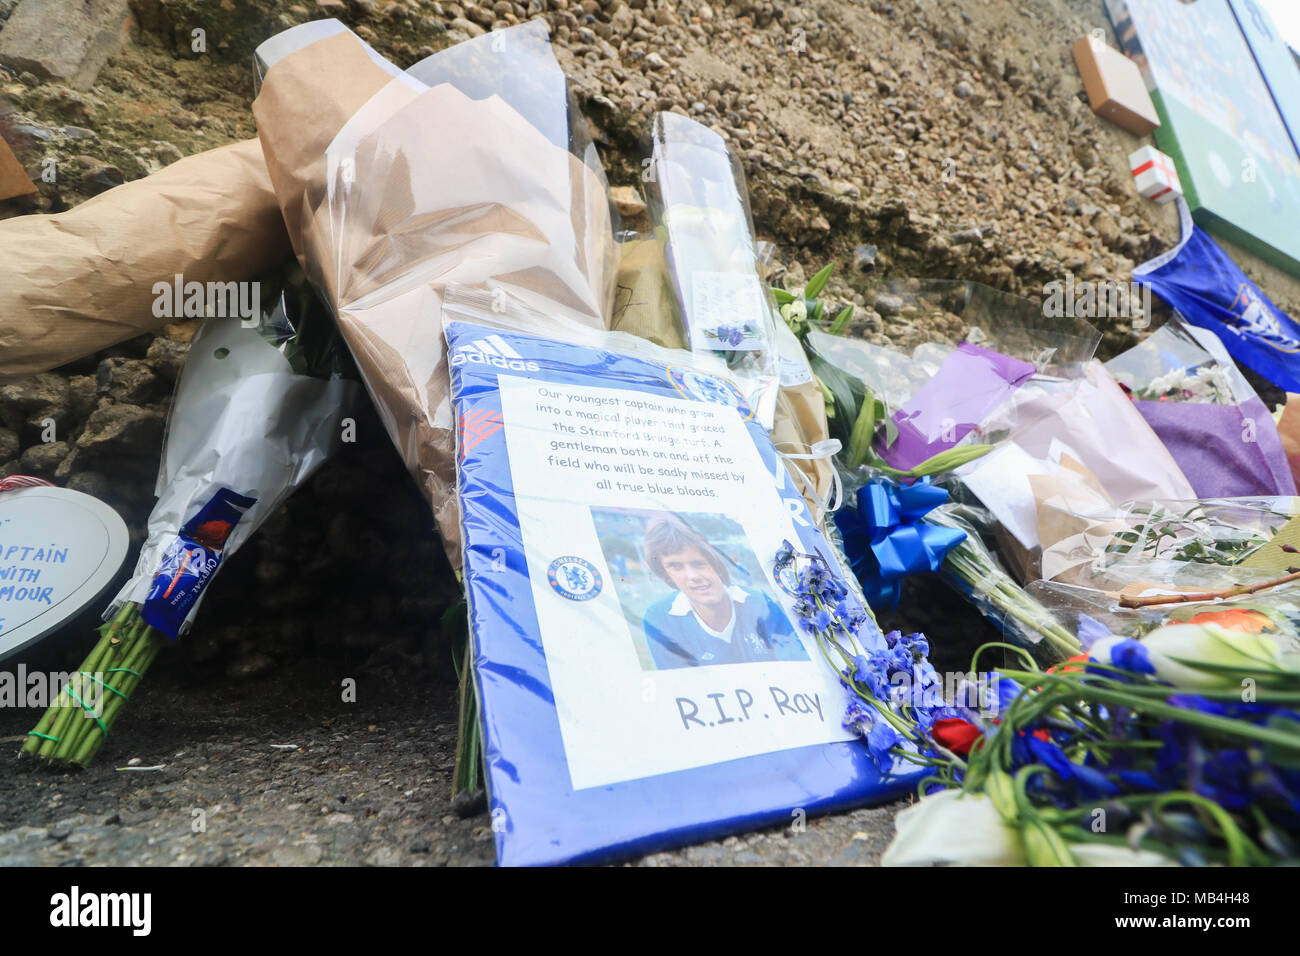 London UK. 7th April 2018. Stamford Bridge. Floral tributes and messages of sympathy from football fans are placed at a special memorial shrine erected at Stamford bridge to the former Chelsea player and legend Ray 'Butch' Wilkins who died aged 61 on 4 April 2018 Credit: amer ghazzal/Alamy Live News Stock Photo